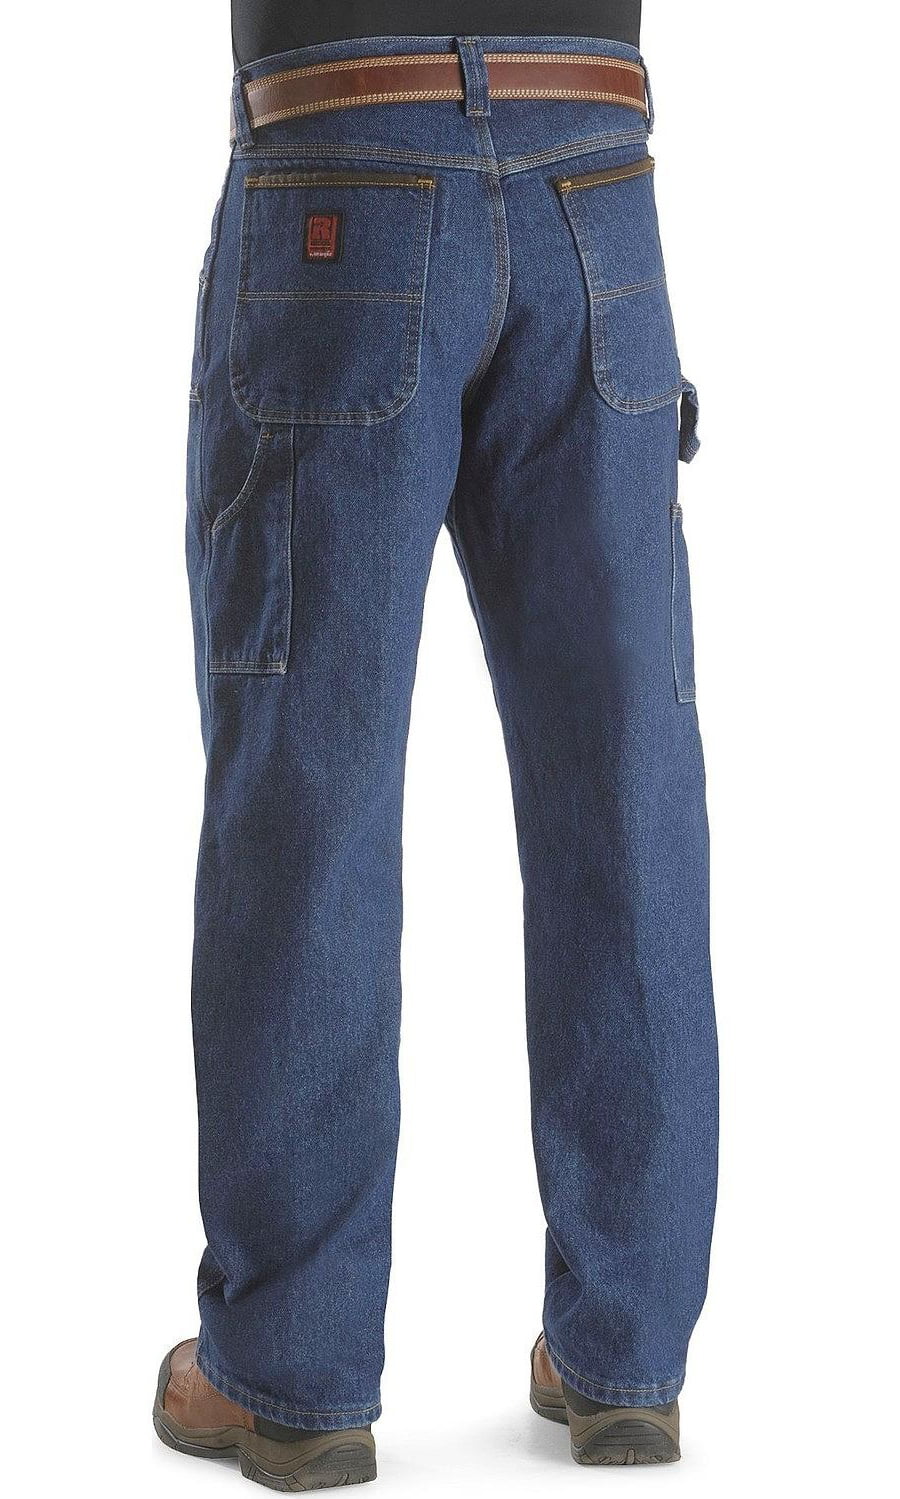 wrangler men's jeans riggs relaxed fit utility ant indigo 36w x 32l ...